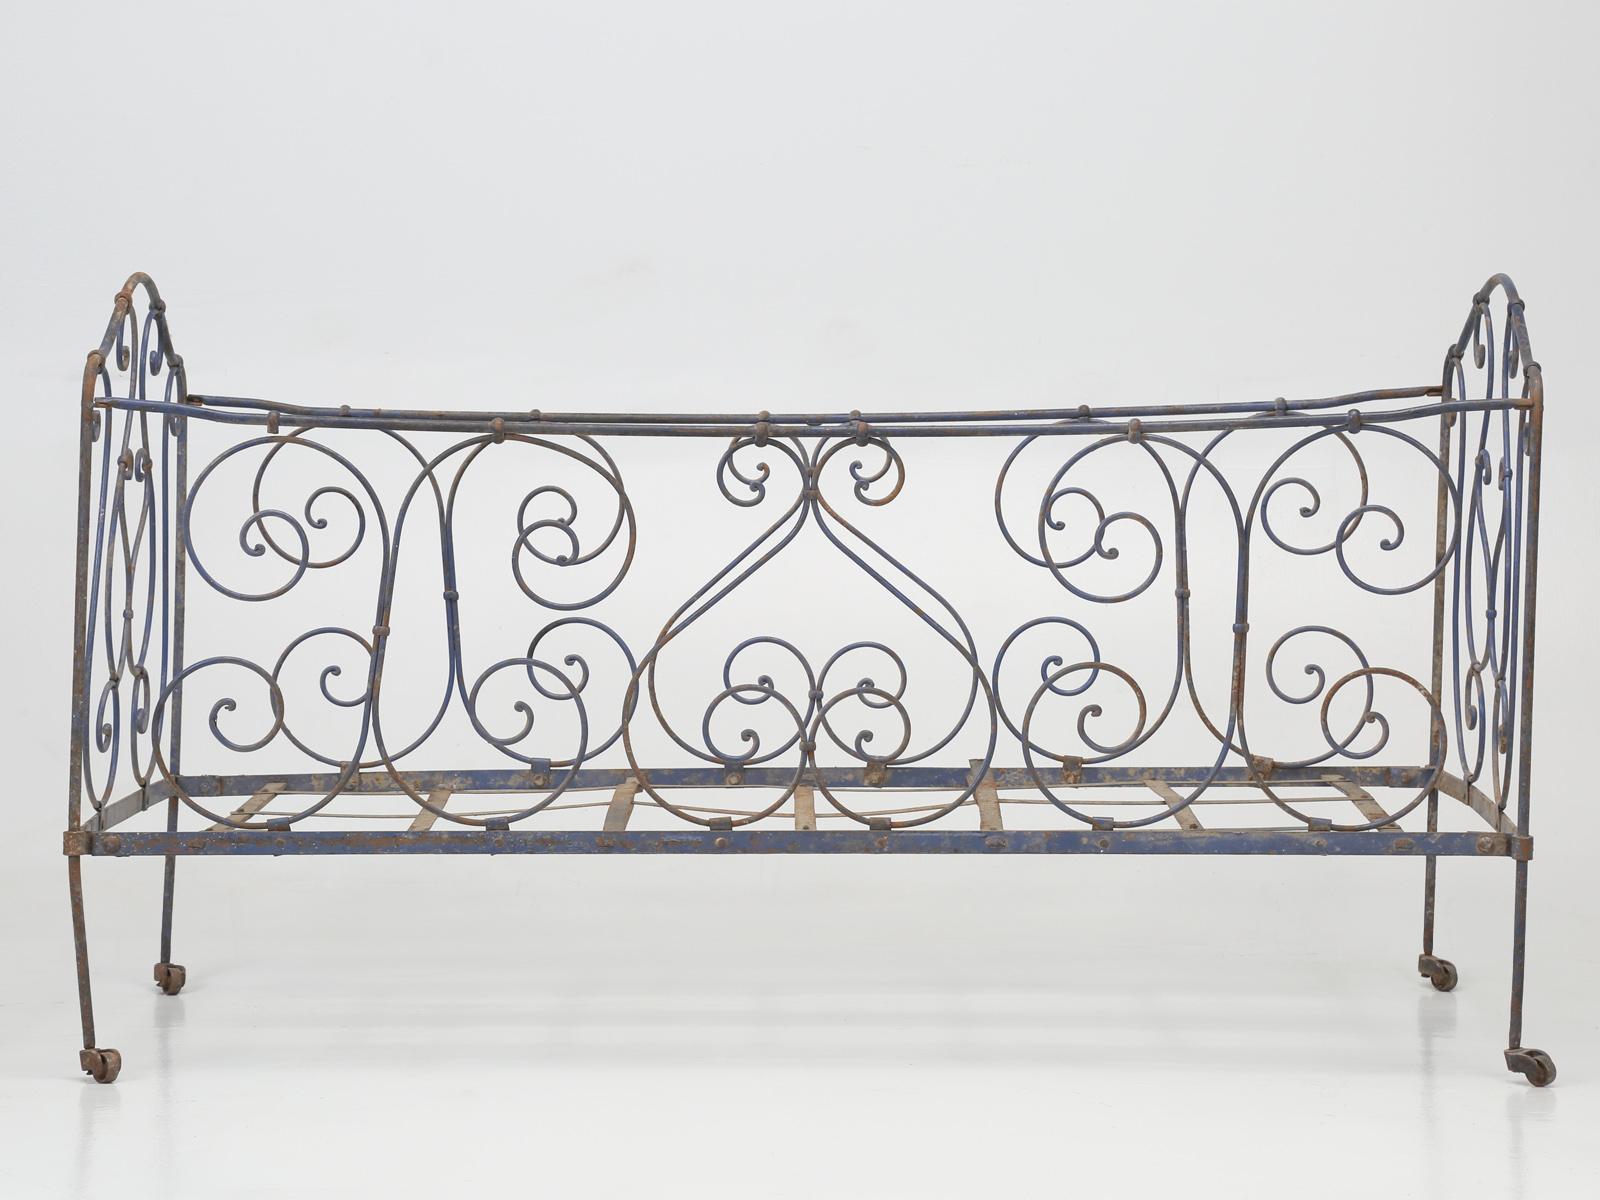 Antique French Child’s Iron Bed in as found condition, with Original Old Paint and could be used to house a Doll or Stuffed Animal collection. Very decorative and very inexpensive.